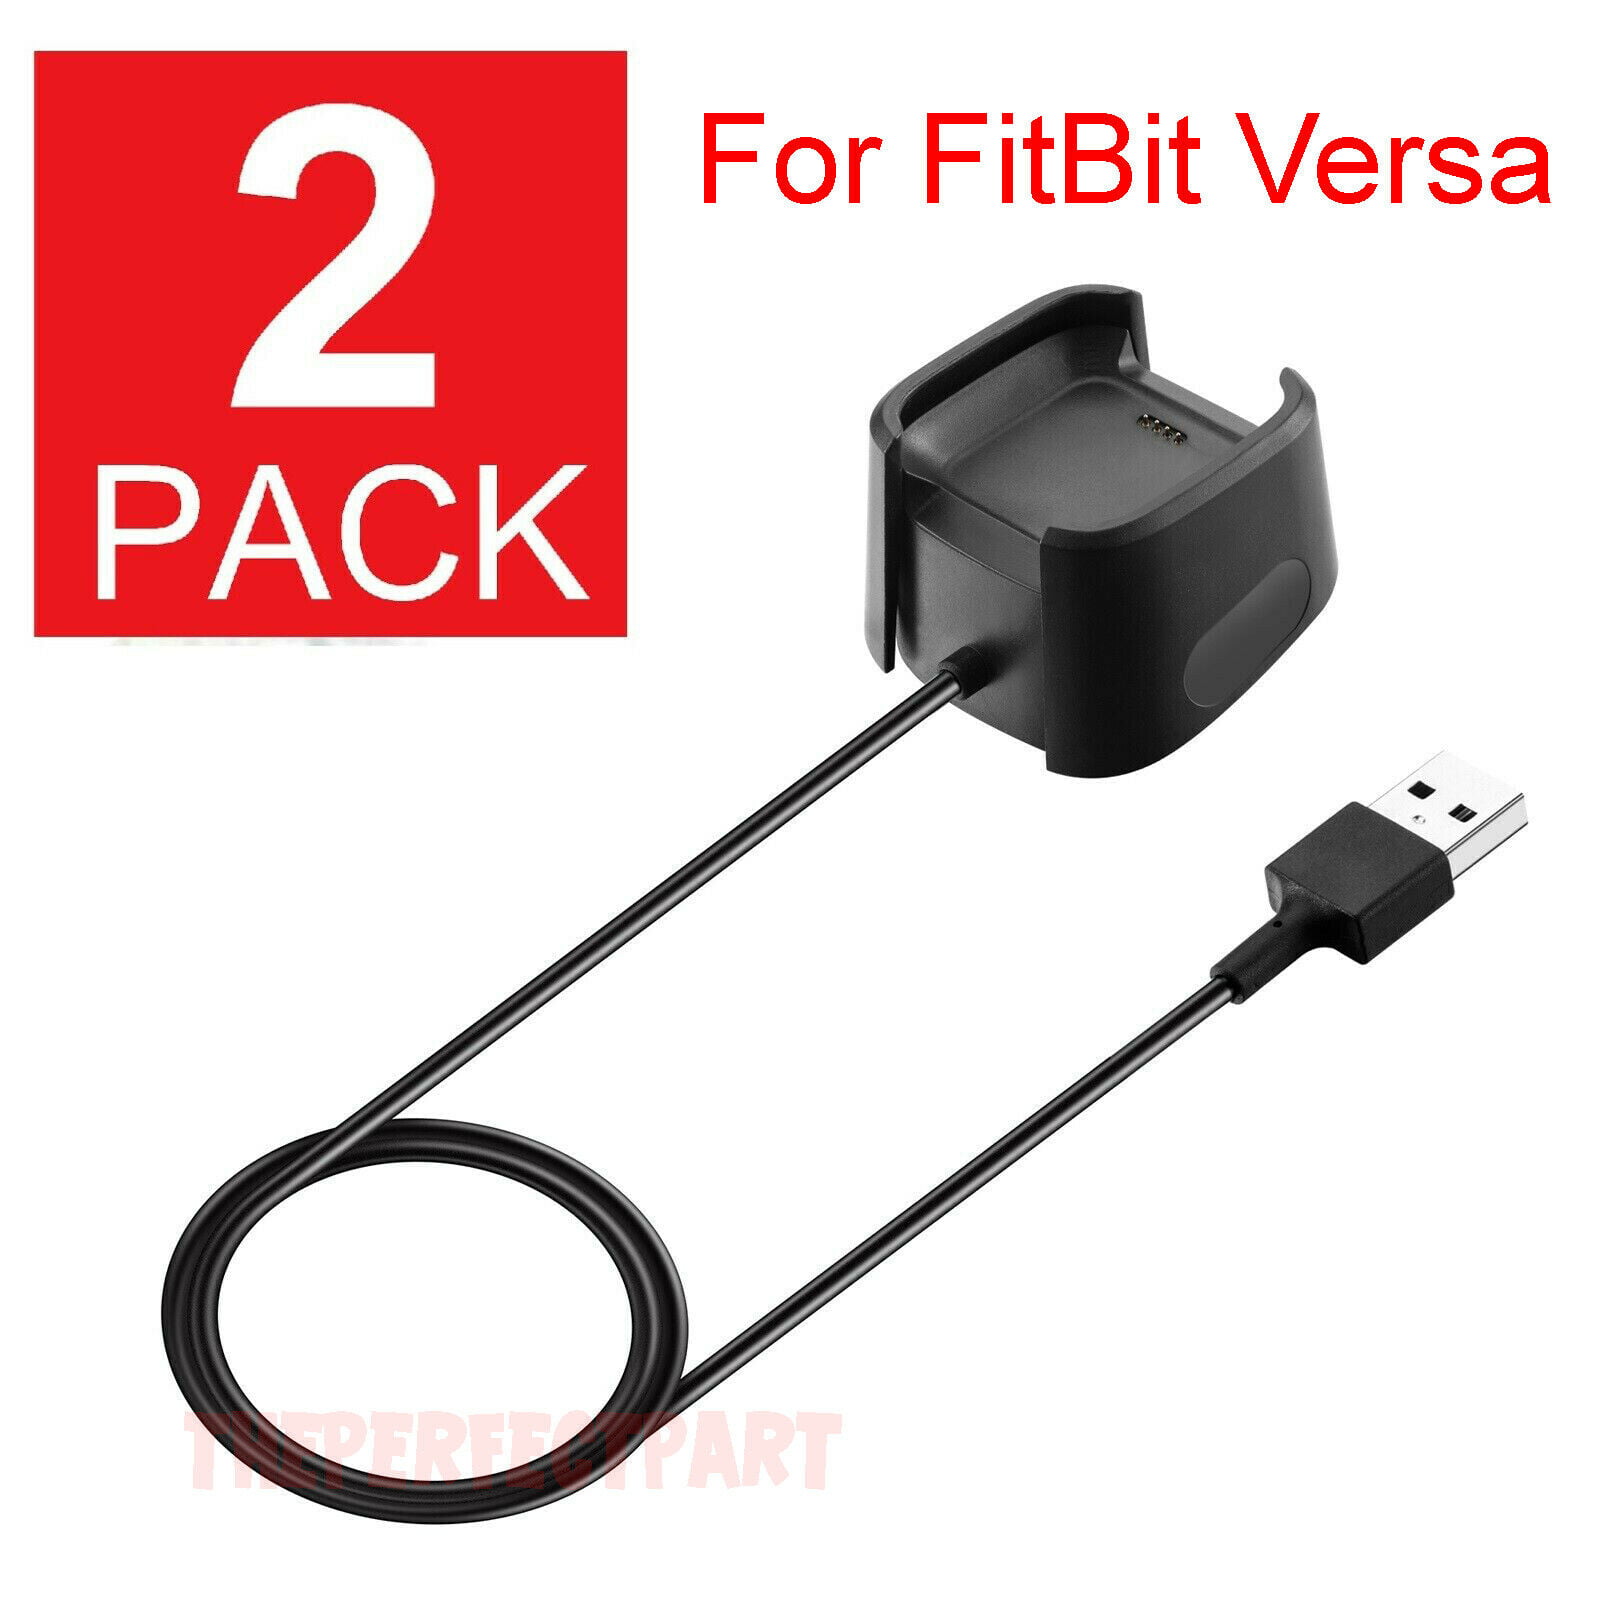 USB Charging Cable Charger Dock Cradle Adapter for New Fitbit Versa Smartwatch 